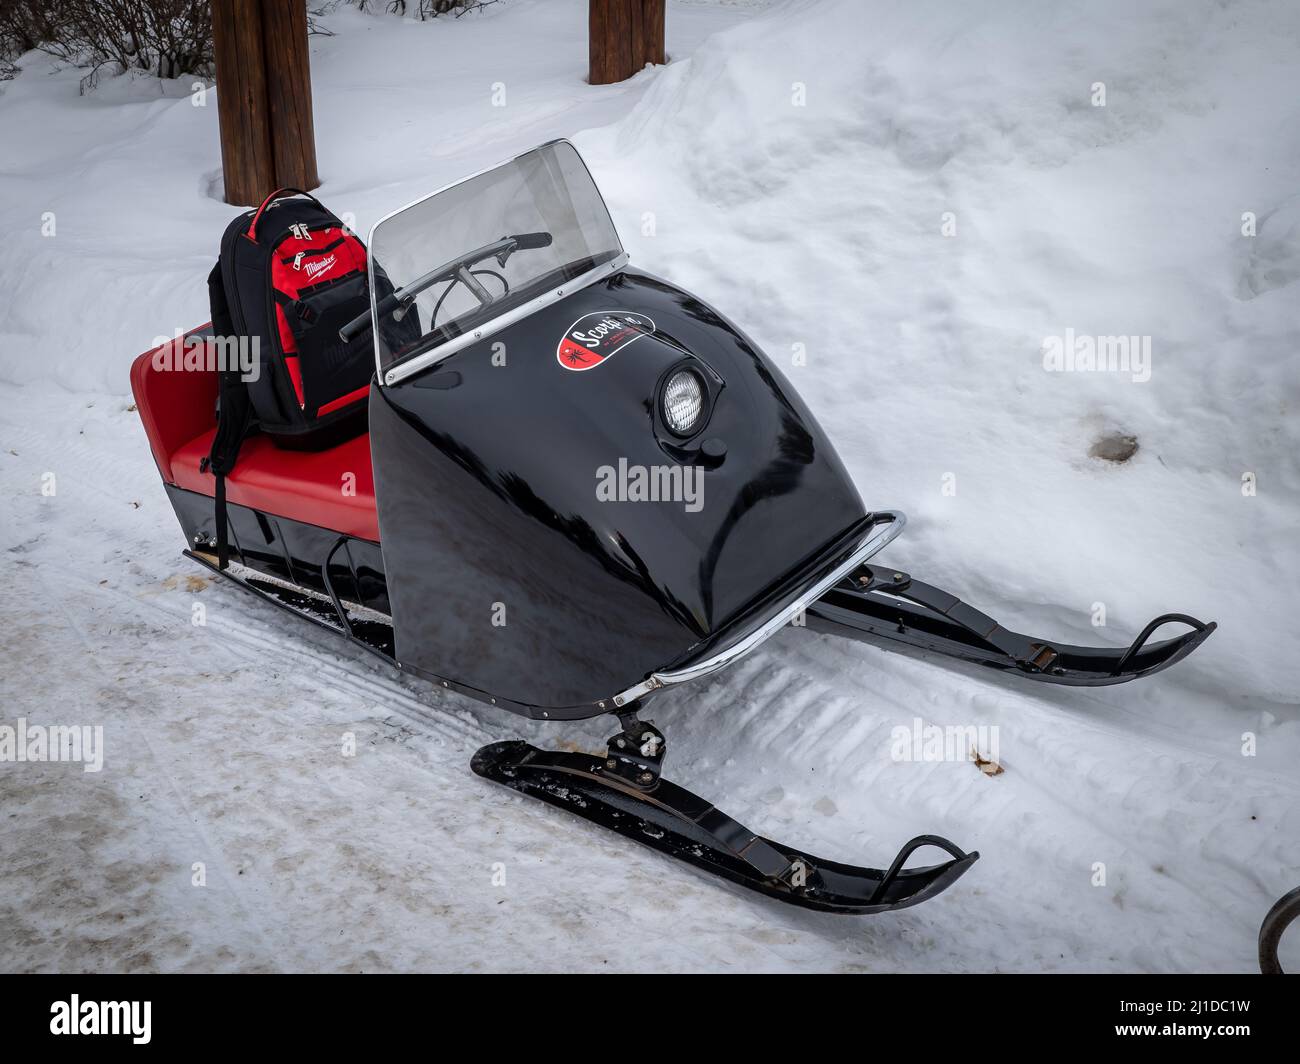 NISSWA, MN - 5 JAN 2022: Old Scorpion snowmobile sits on winter snow. Black 1970s vintage sled with red seat. Stock Photo